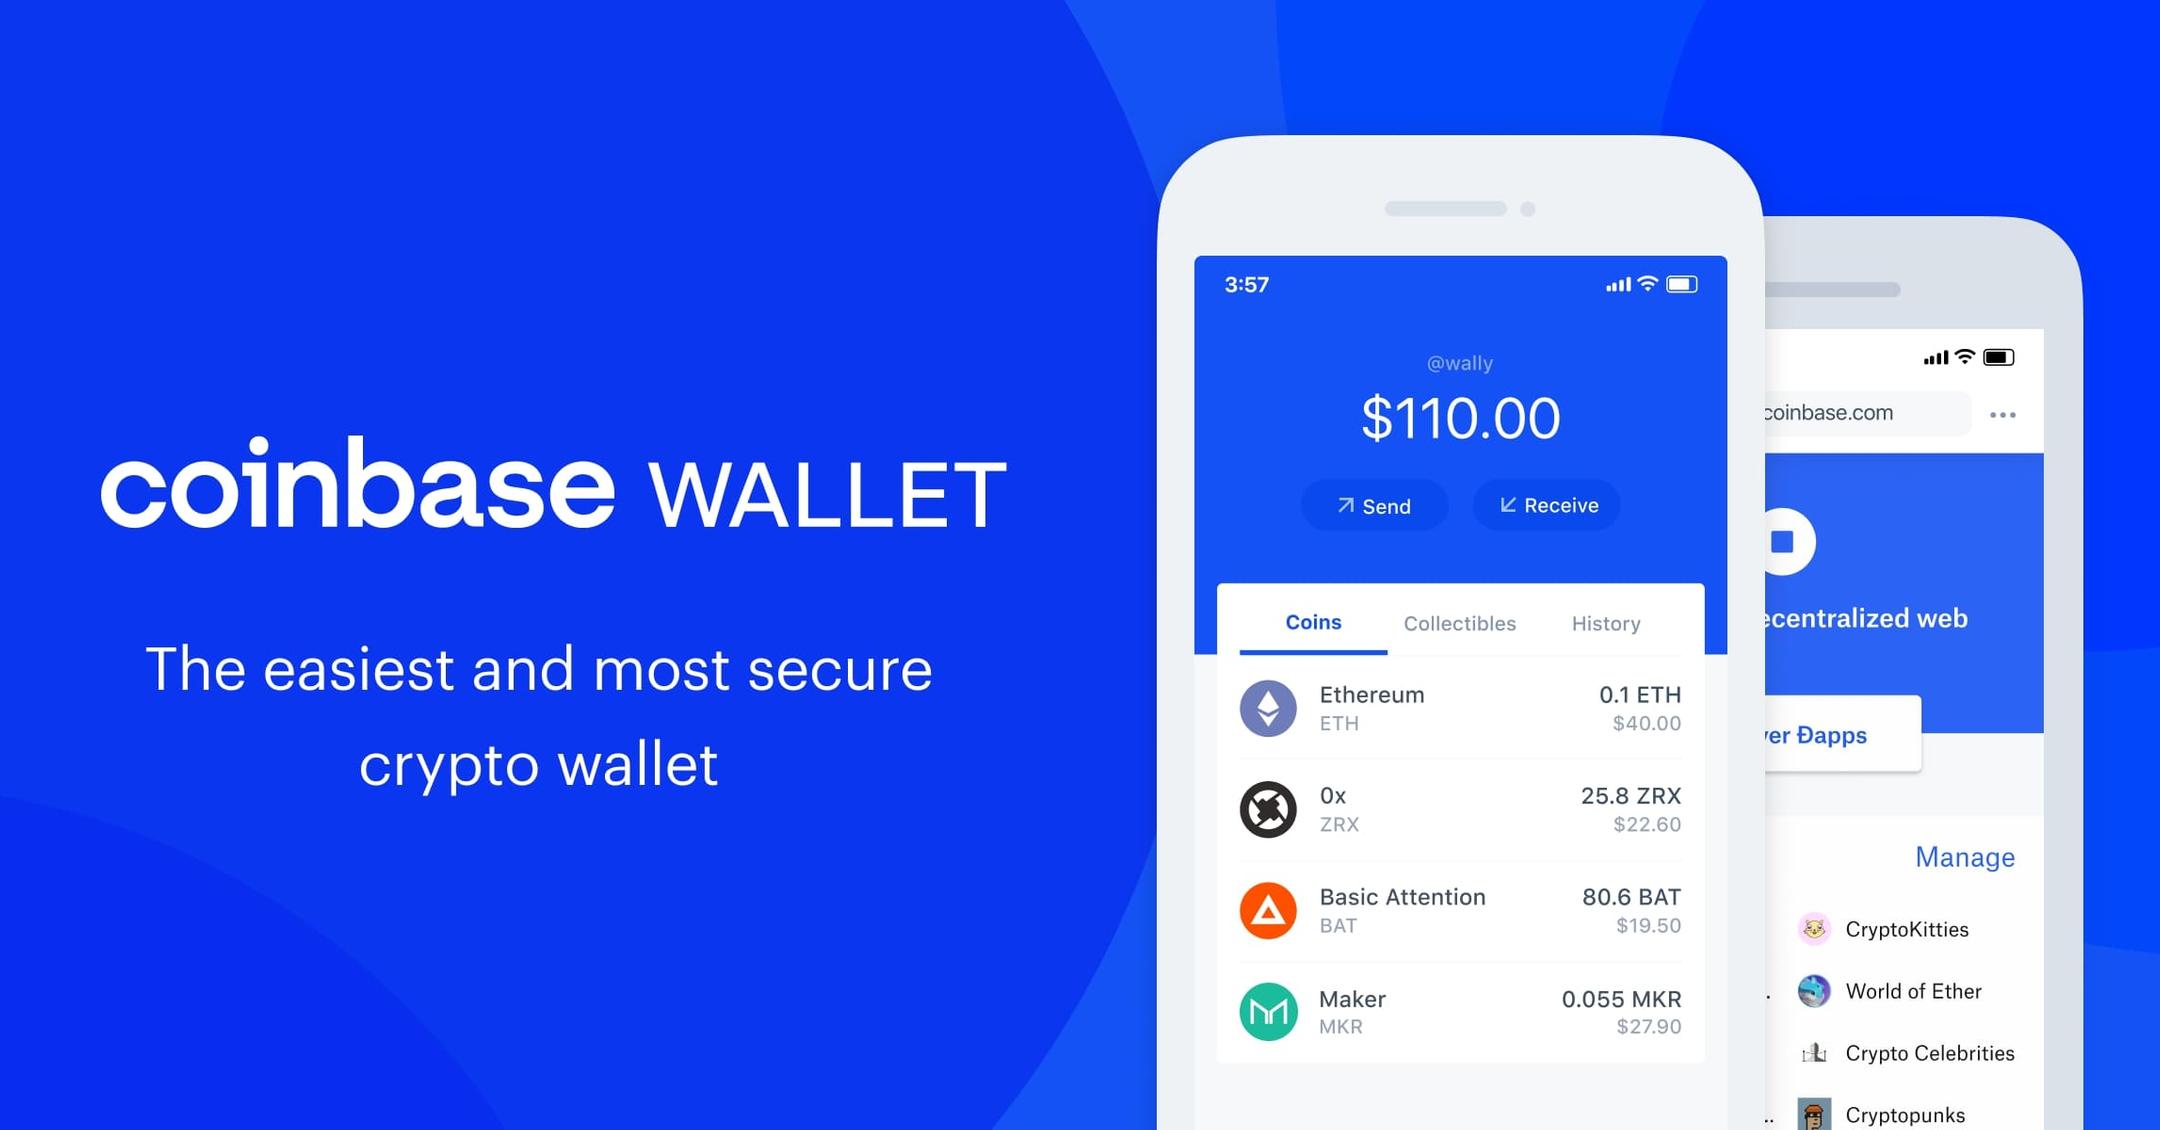 what are the fees on coinbase wallet